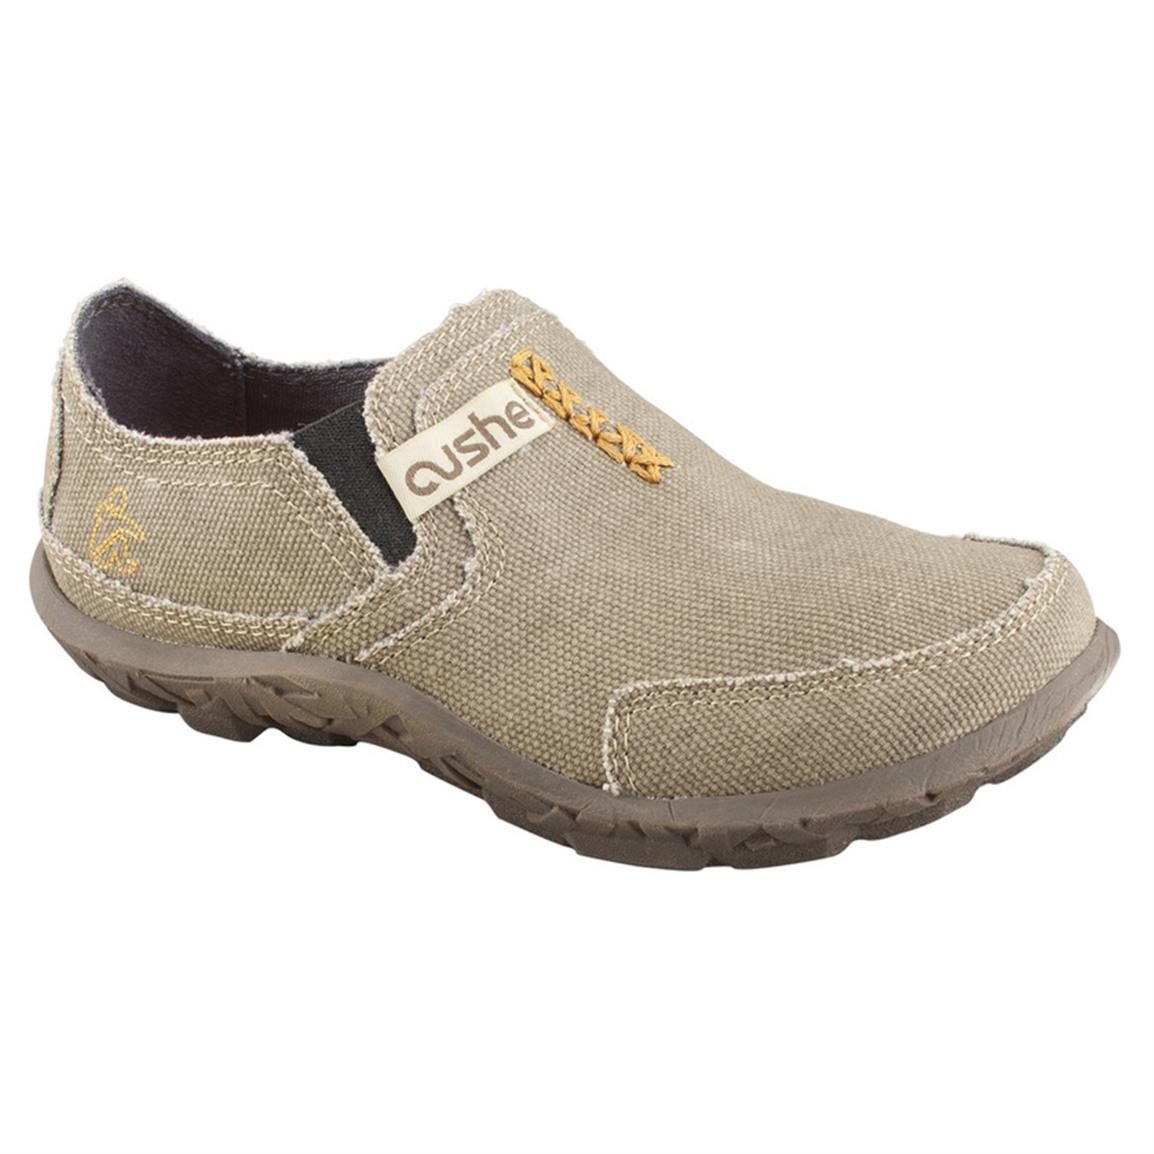 Children's Cushe® Slipper Shoes - 583470, Casual Shoes at Sportsman's Guide